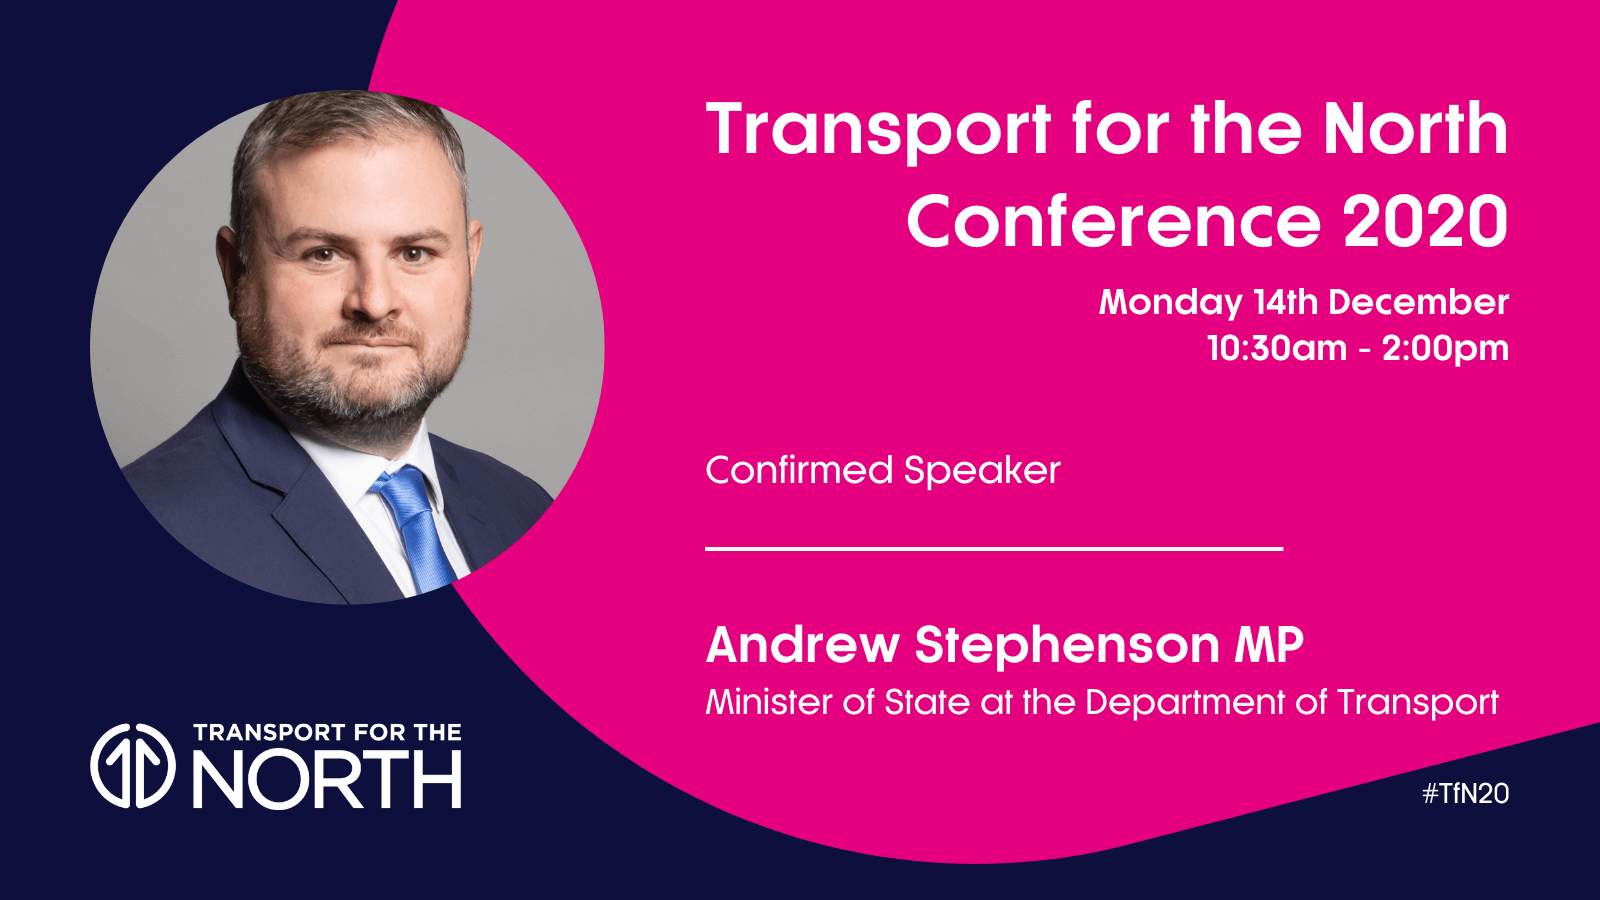 Transport Minister Andrew Stephenson MP will join a the list of high-profile speakers for Transport for the North's Annual Conference 2020.